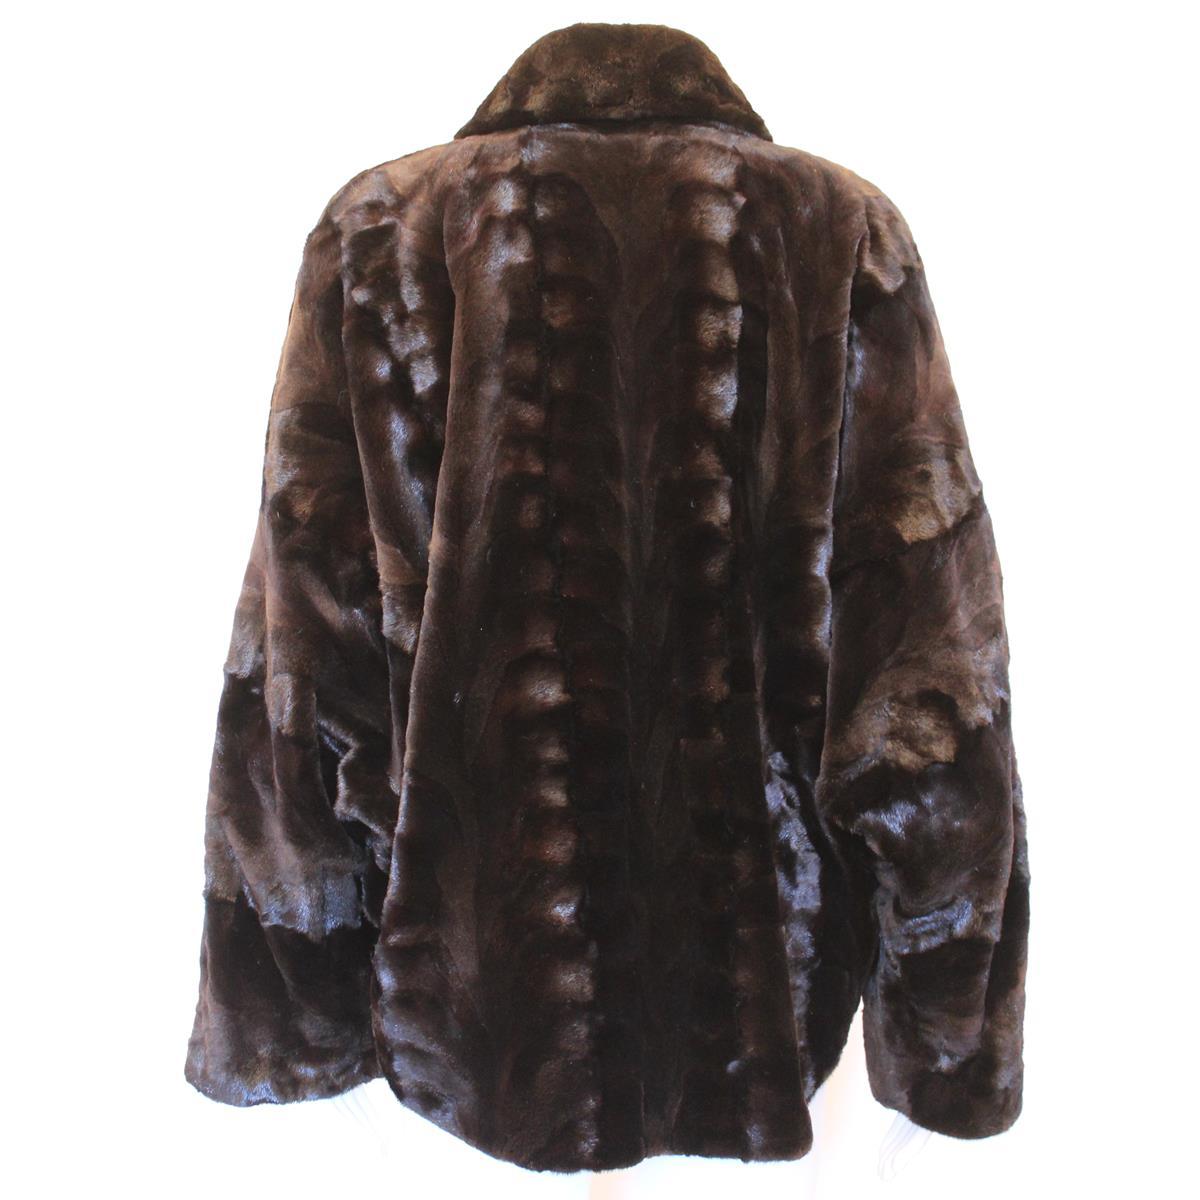 Beautiful and very chic mink jacket with kimono sleeve
Real mink
Black color
Brown shaded
Two pockets
Two jewel buttons
Shoulder cm 52 (20.4 inches)
Length from shoulder cm 62 (24.4  inches)
Worldwide express shipping included in the price !